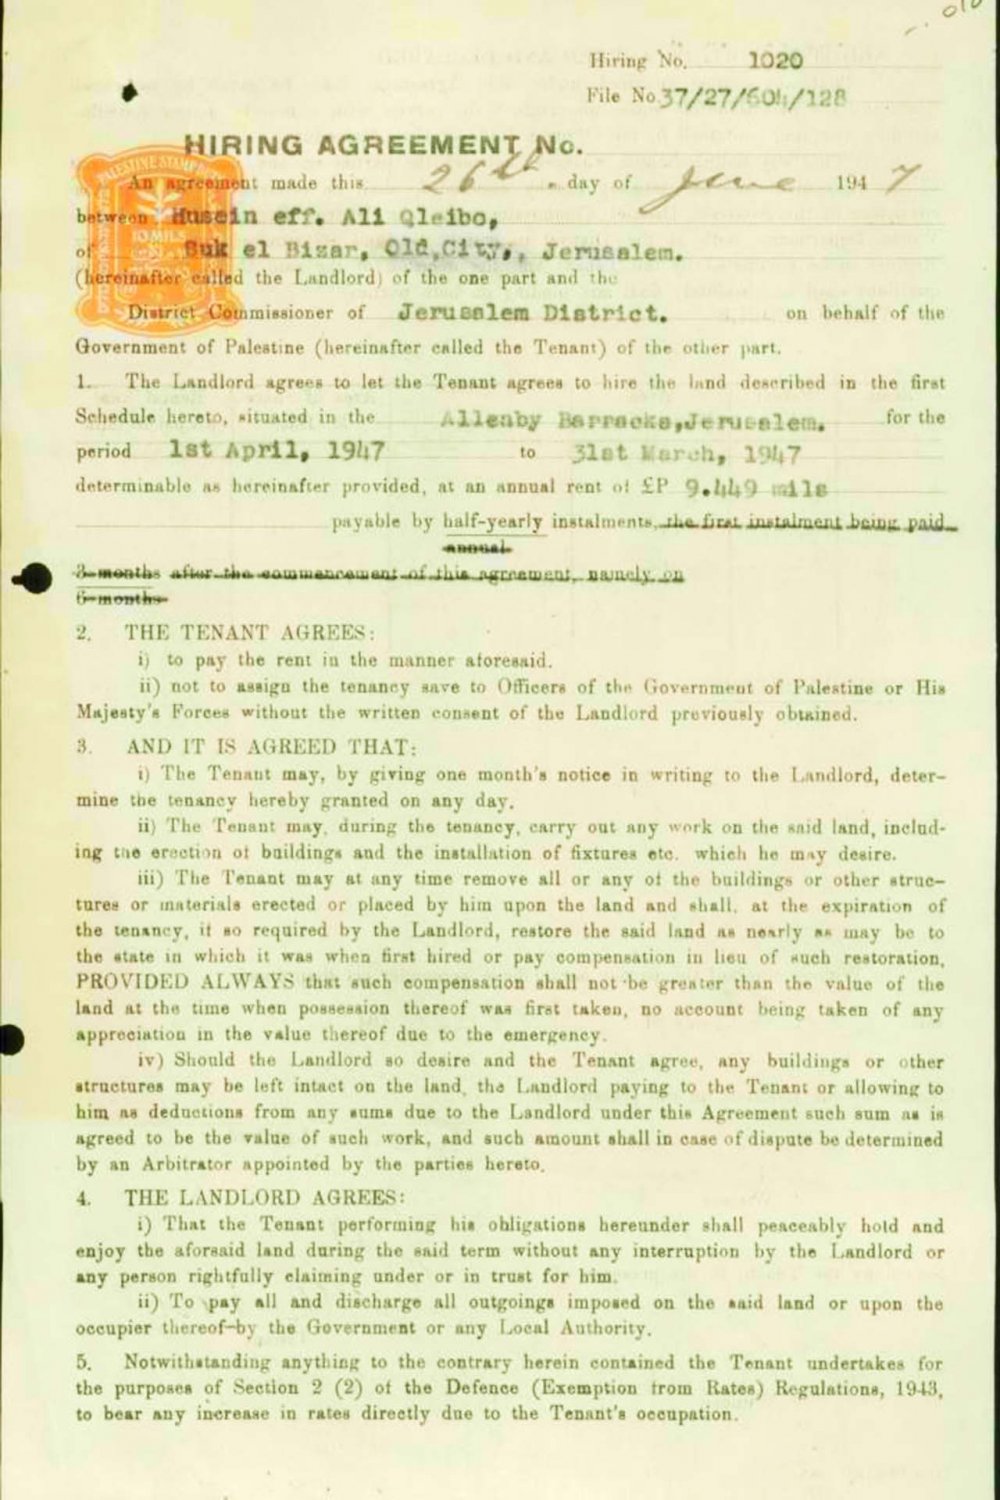 Page 1 of a June 1947 rental agreement between landowner Hussein Effendi Ali Qleibo and the British Government of Palestine